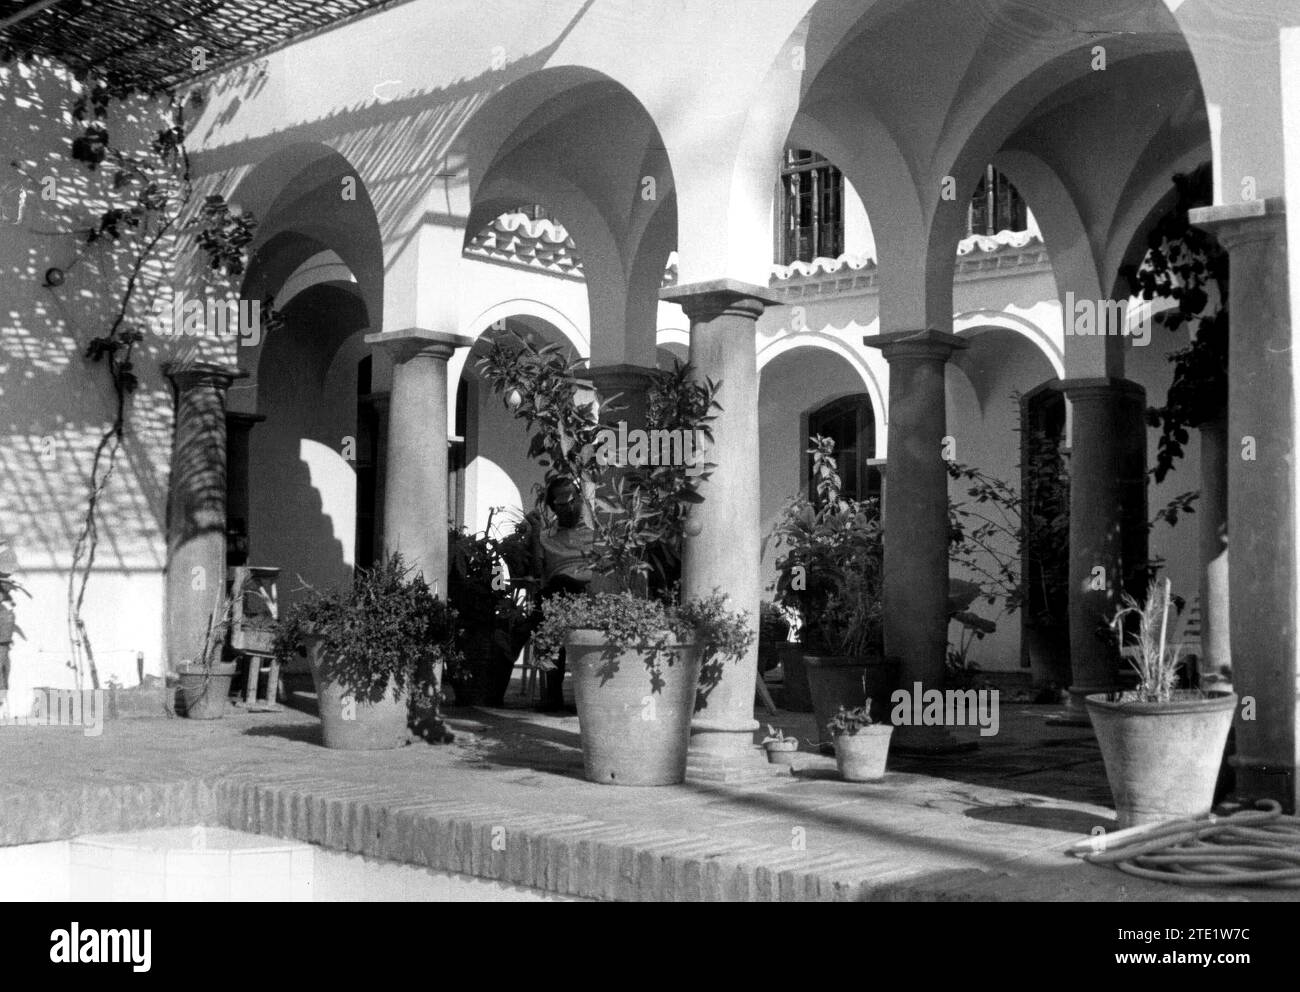 12/31/1959. Pueblo López, Built by an Englishman, only for Foreigners and located in the vicinity of Fuengirola (Málaga). Credit: Album / Archivo ABC / Torremocha Stock Photo